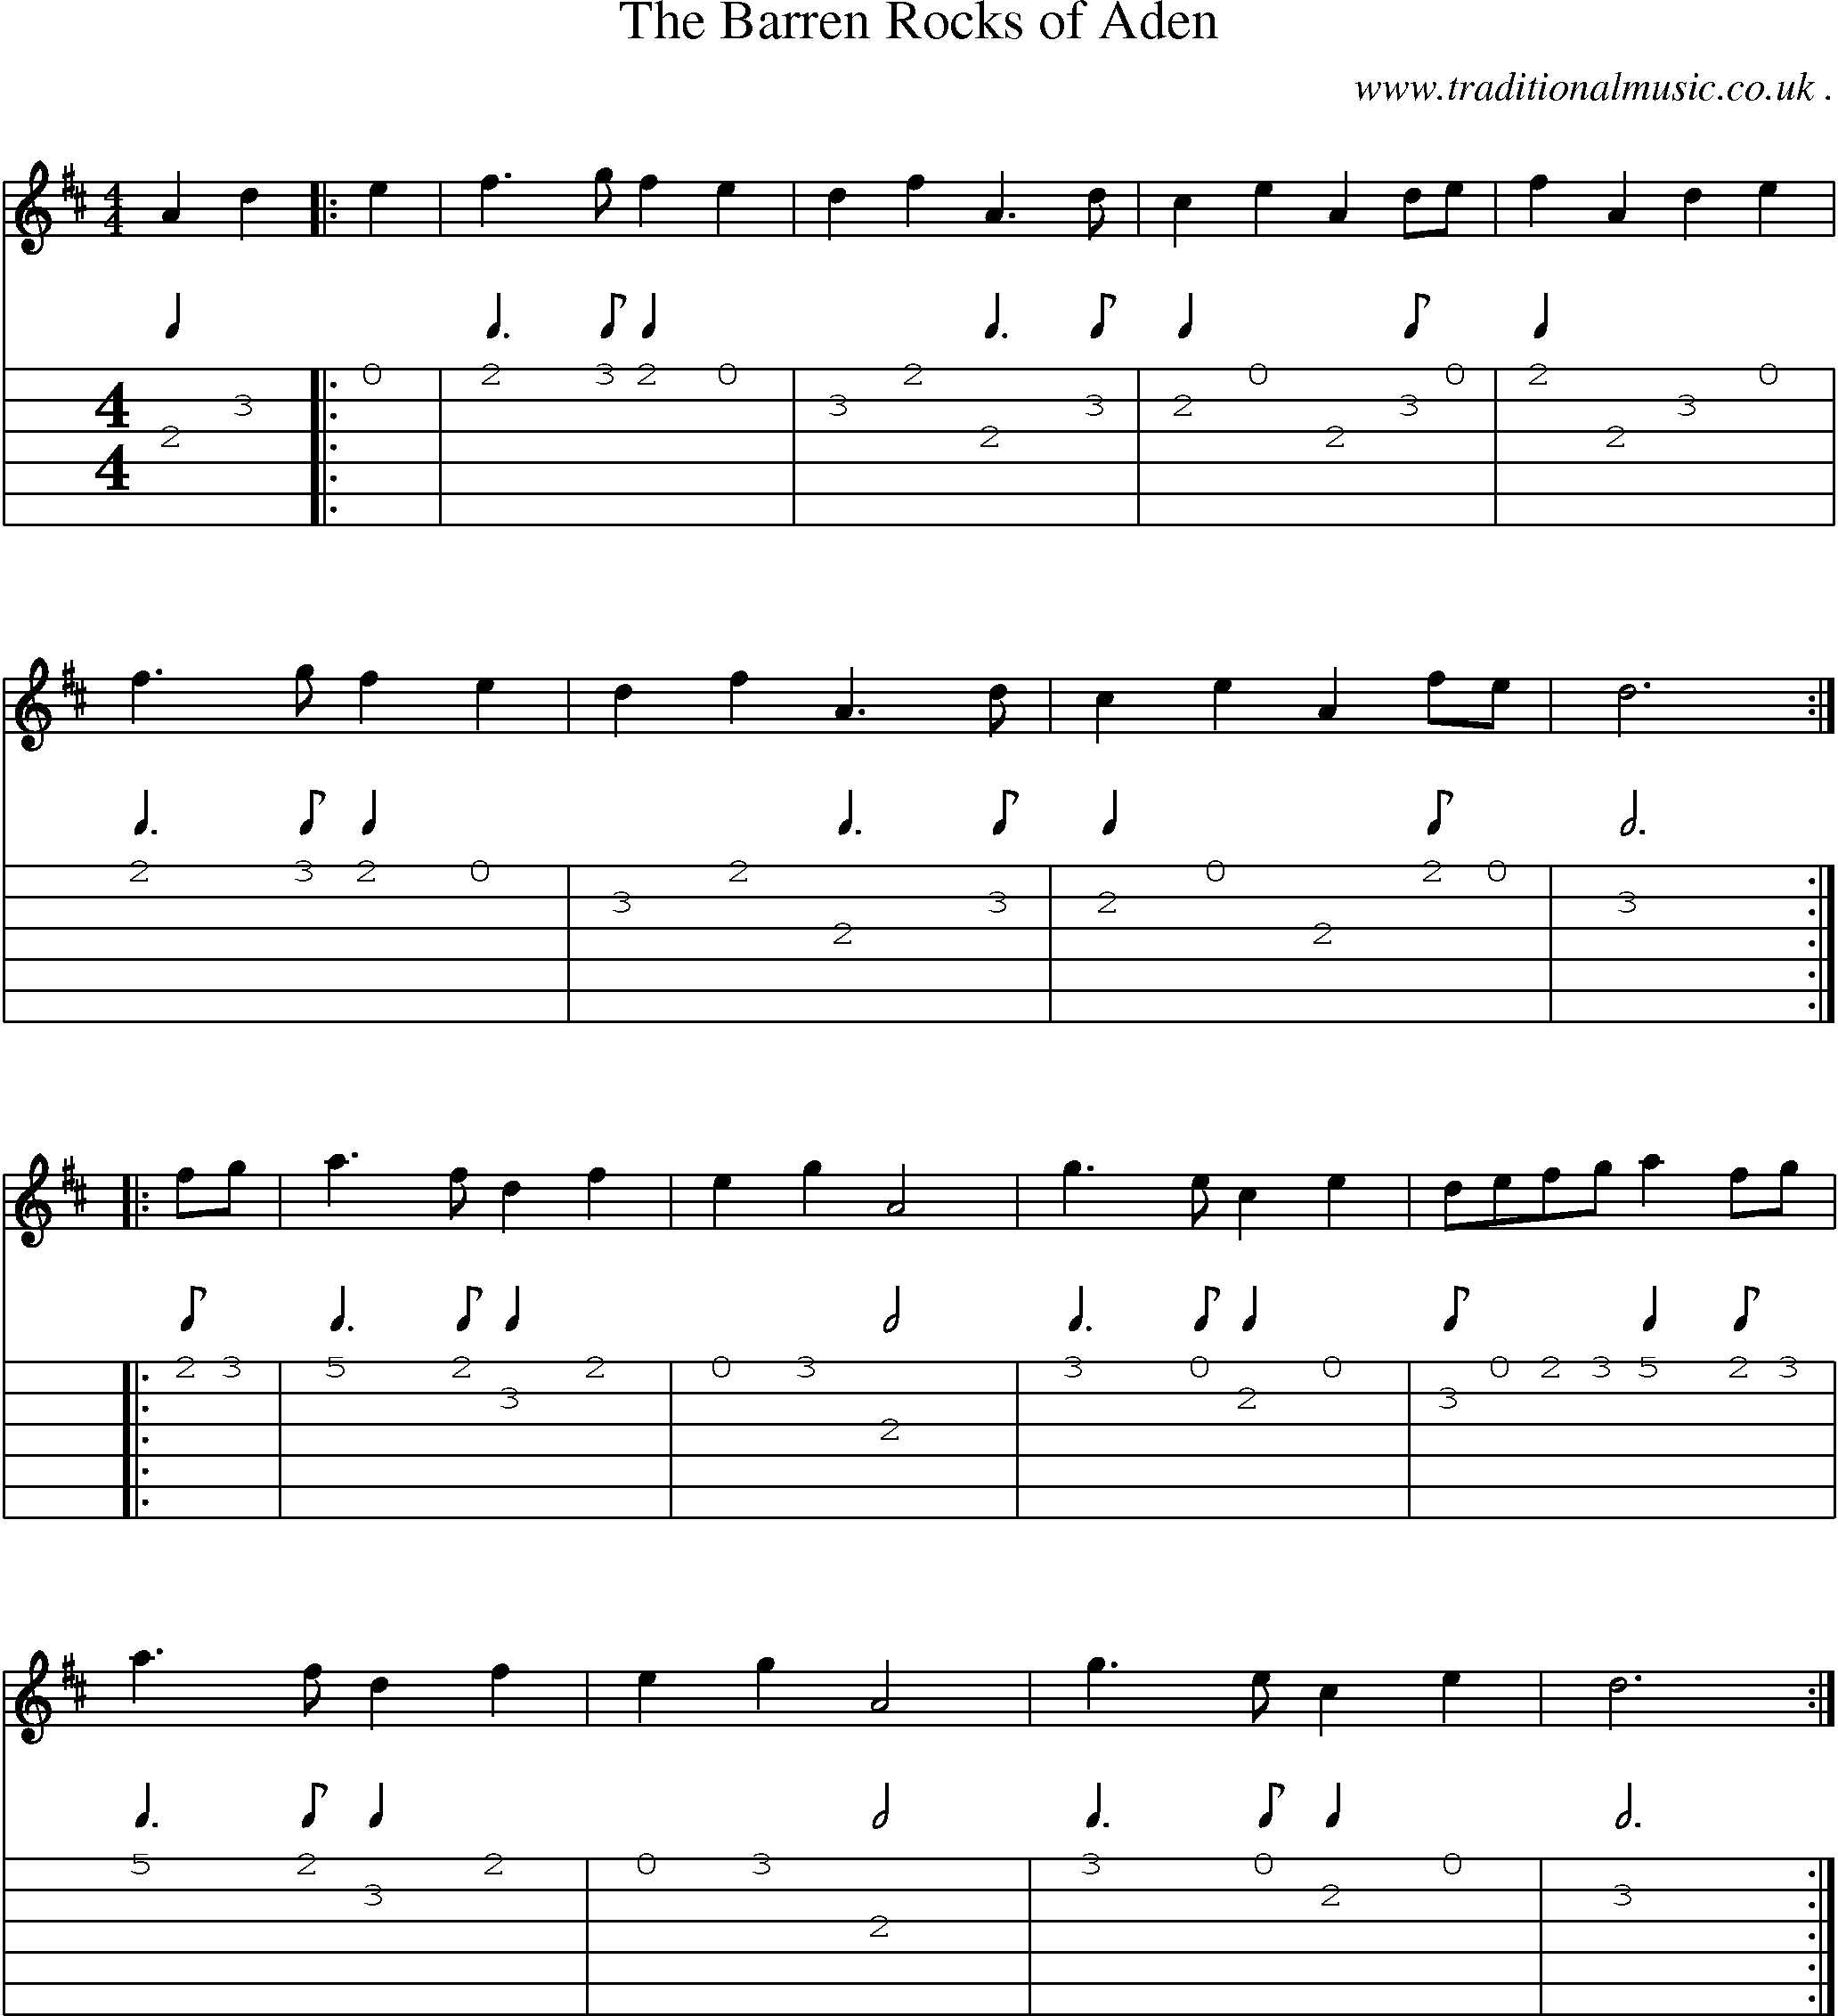 Sheet-Music and Guitar Tabs for The Barren Rocks Of Aden